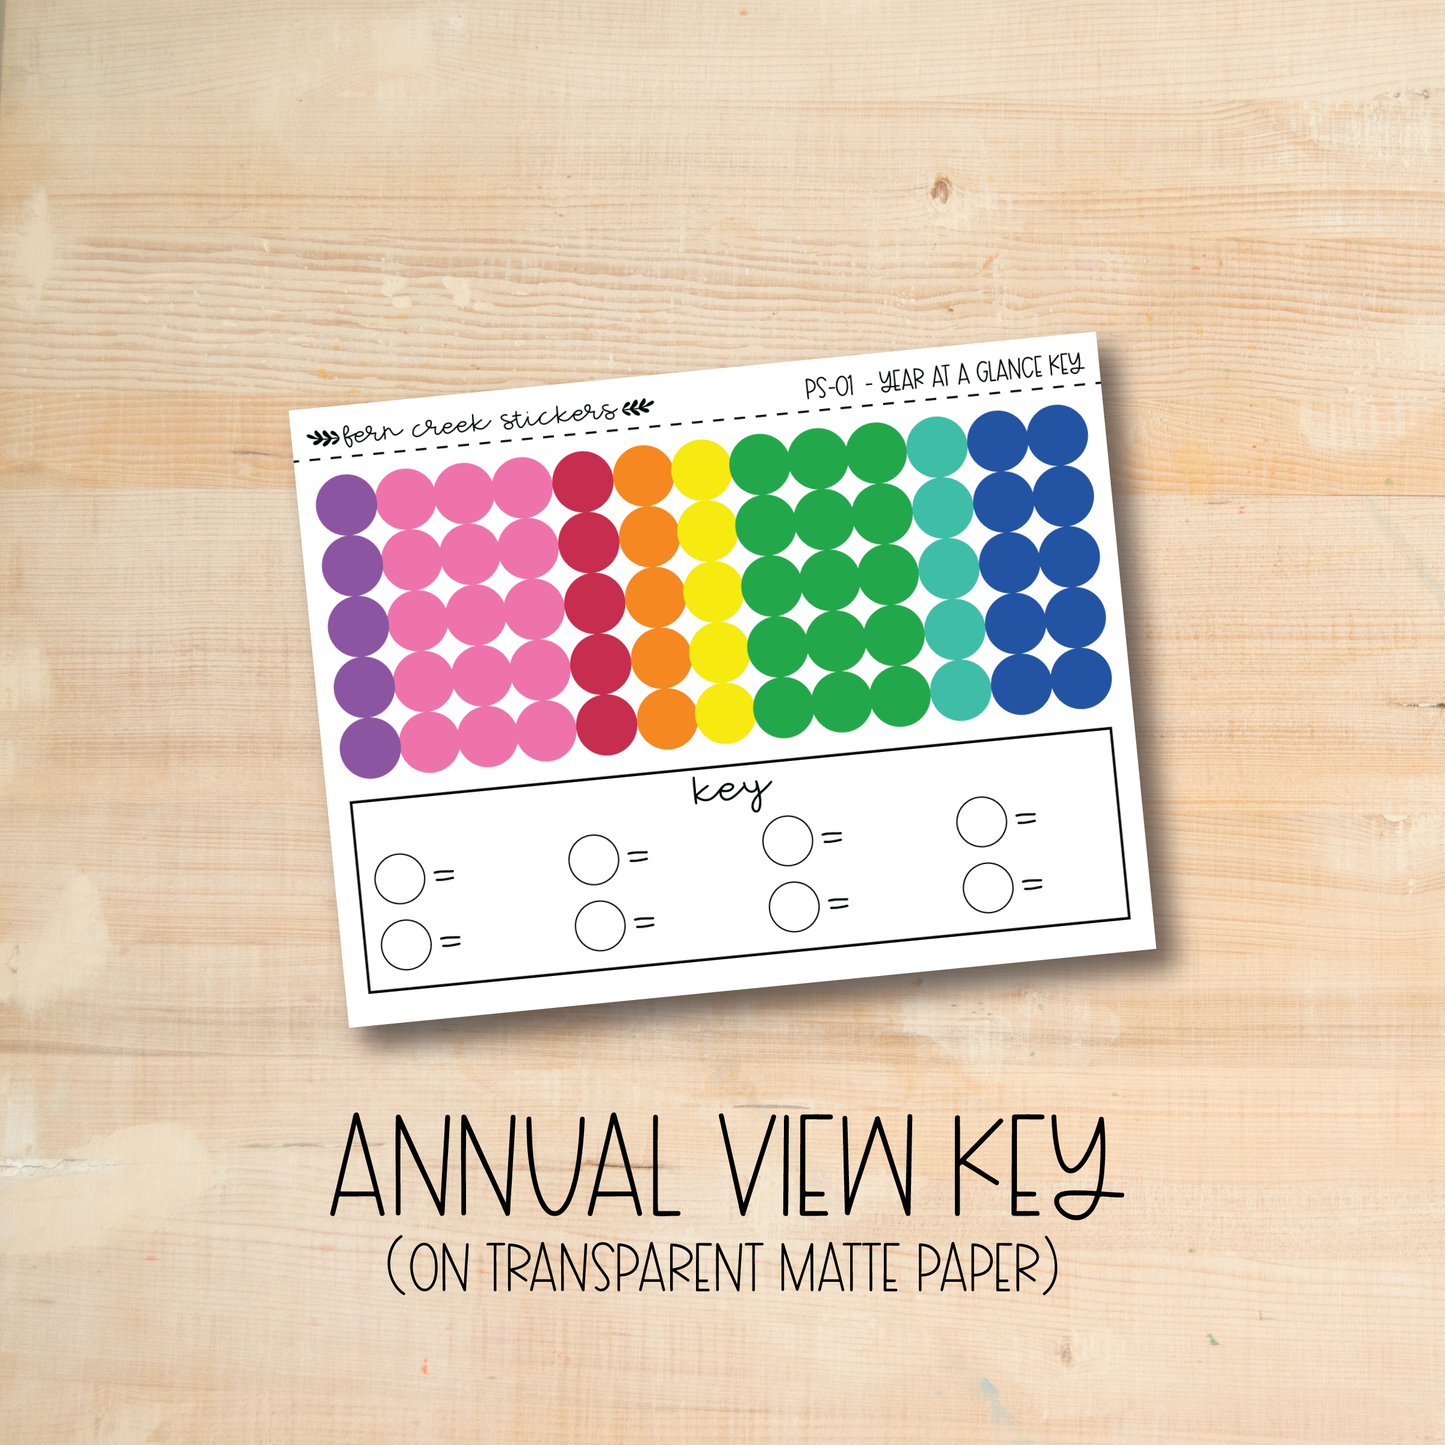 PS-01 || Annual view key and dots on transparent matte paper